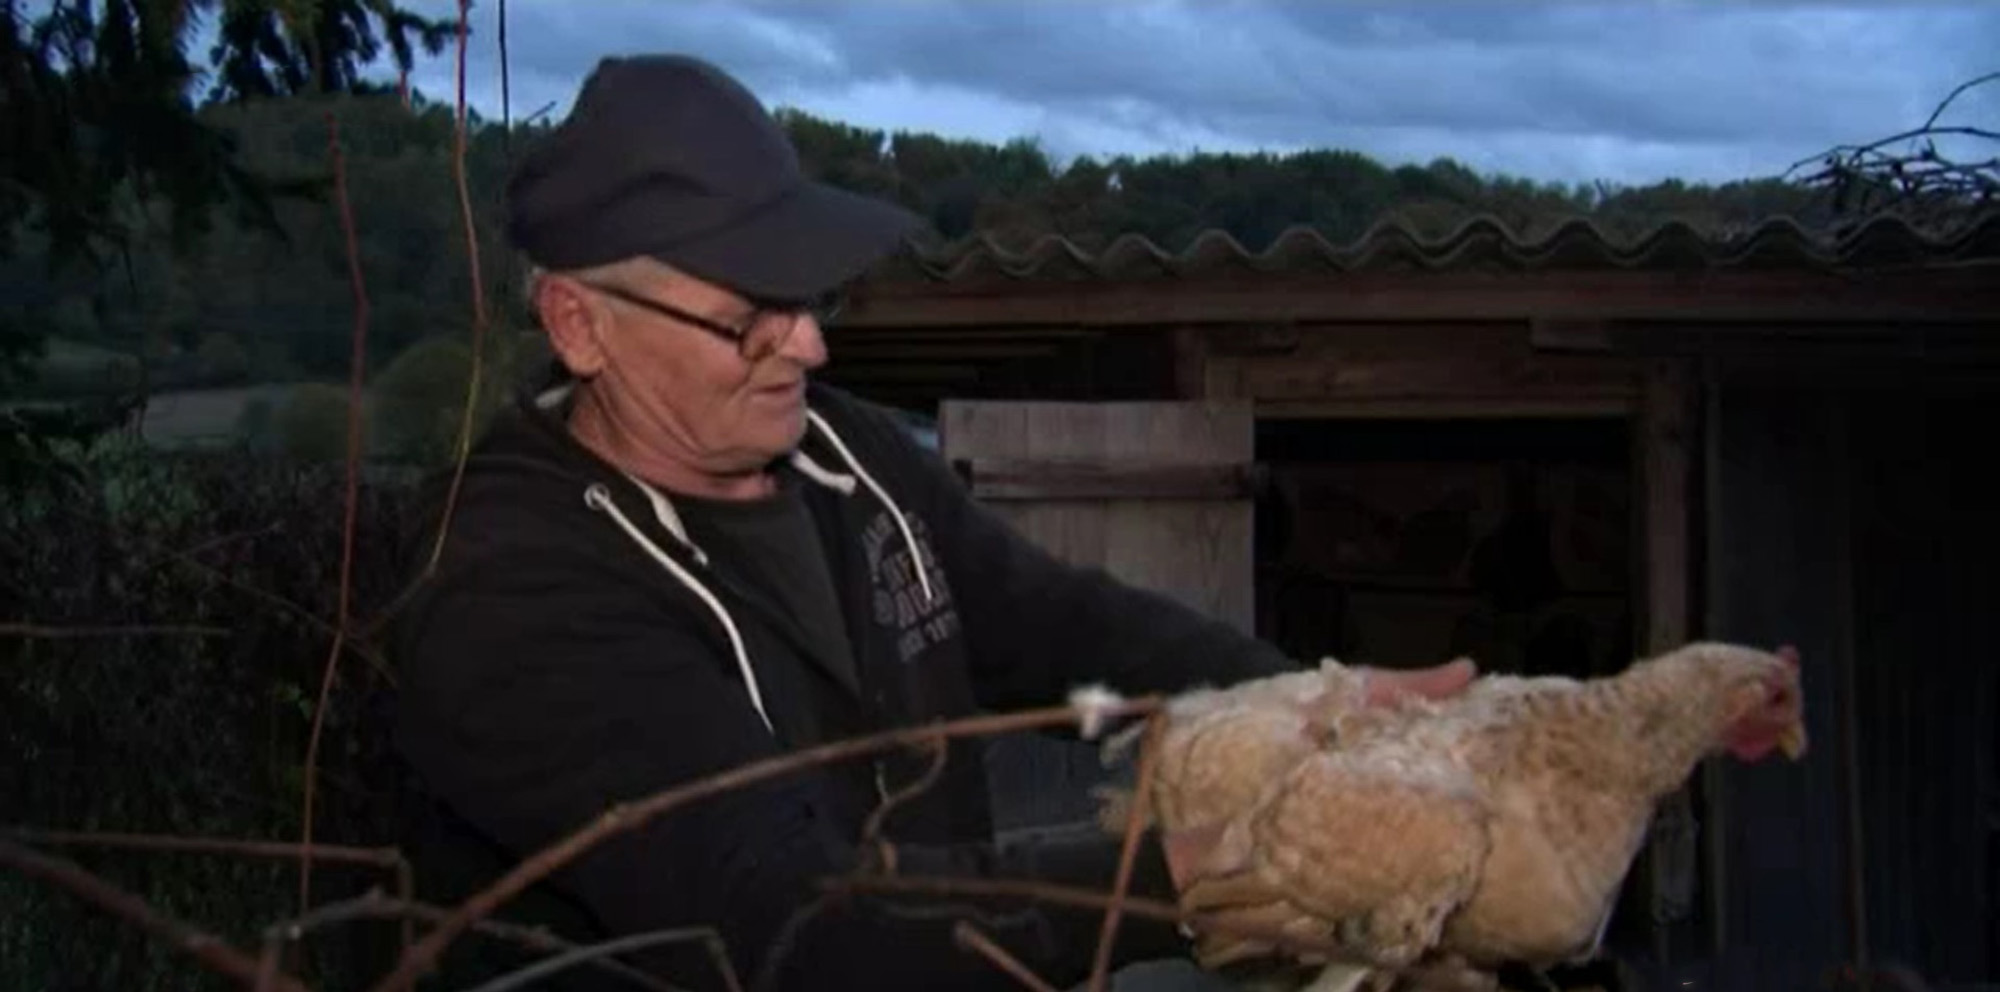 Read more about the article Chicken Back From Dead After Vicious Kick By Footballer